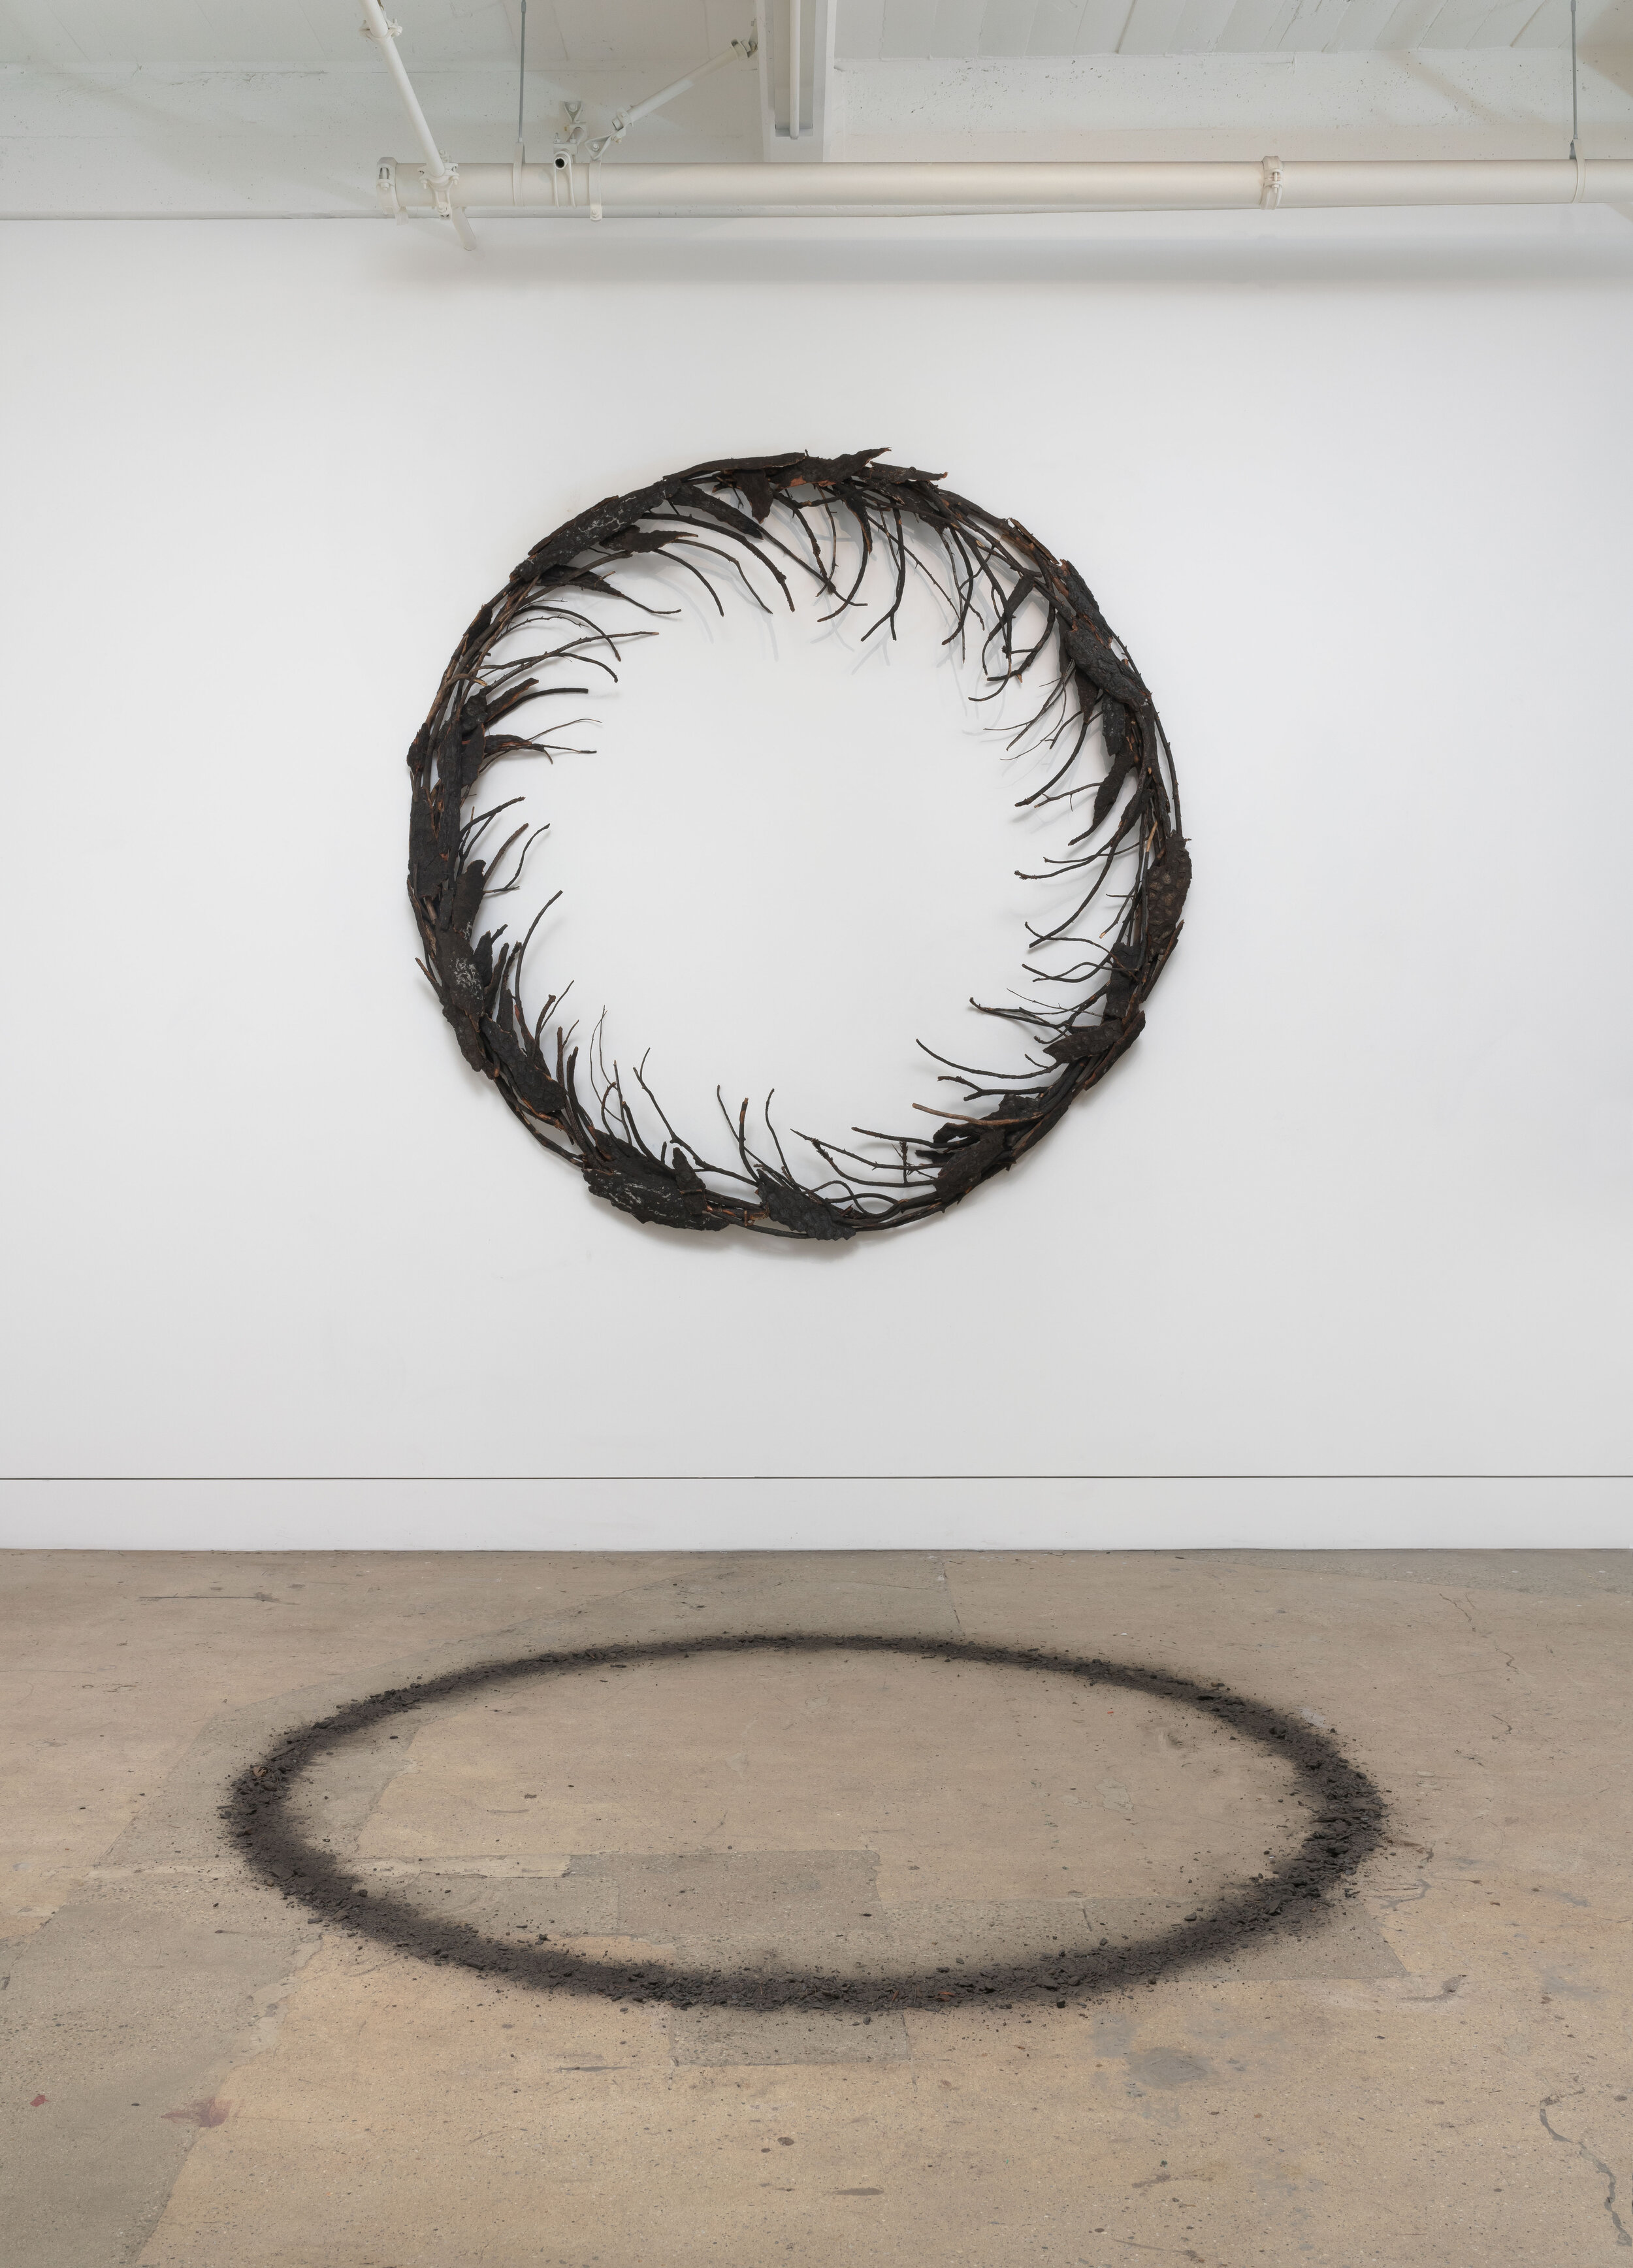  Shasta Wreath, 2020, organic materials obtained in collaboration with a Bureau of Land Management Forester, 100 inches diameter, wreath, 100 inches diameter, ash circle 